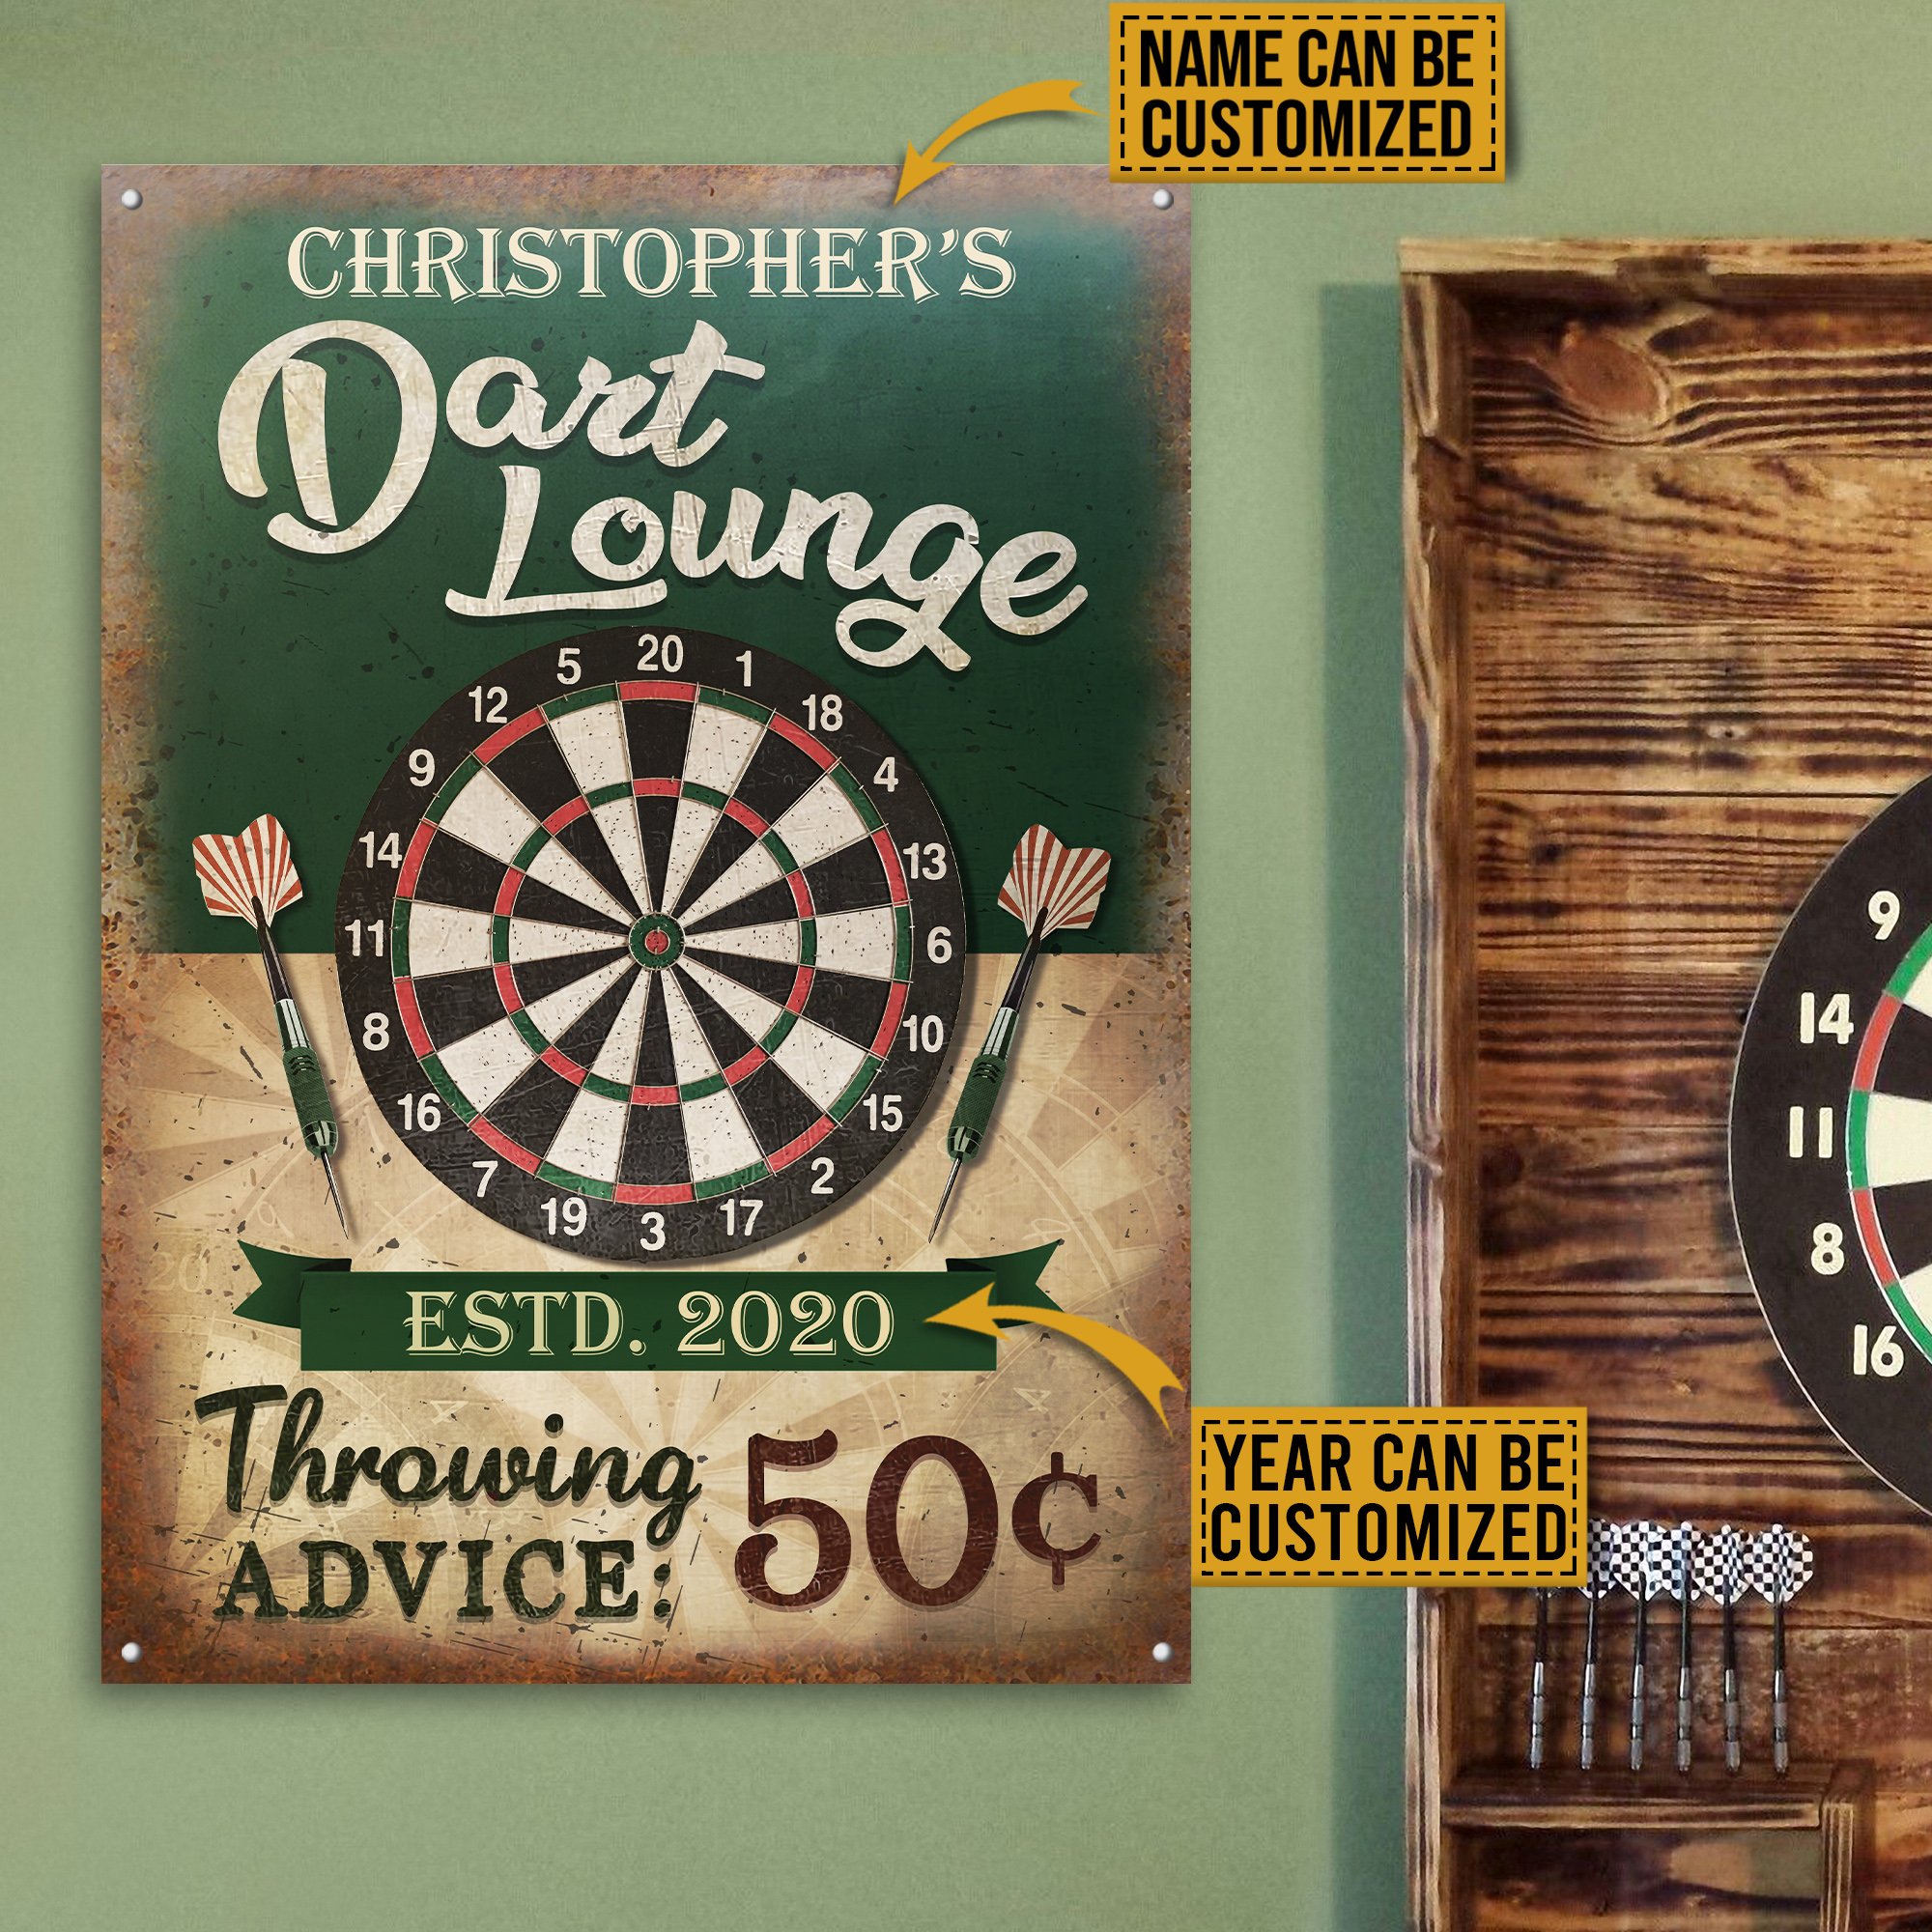 Personalized Darts Throwing Advice Customized Classic Metal Signs - Teehall